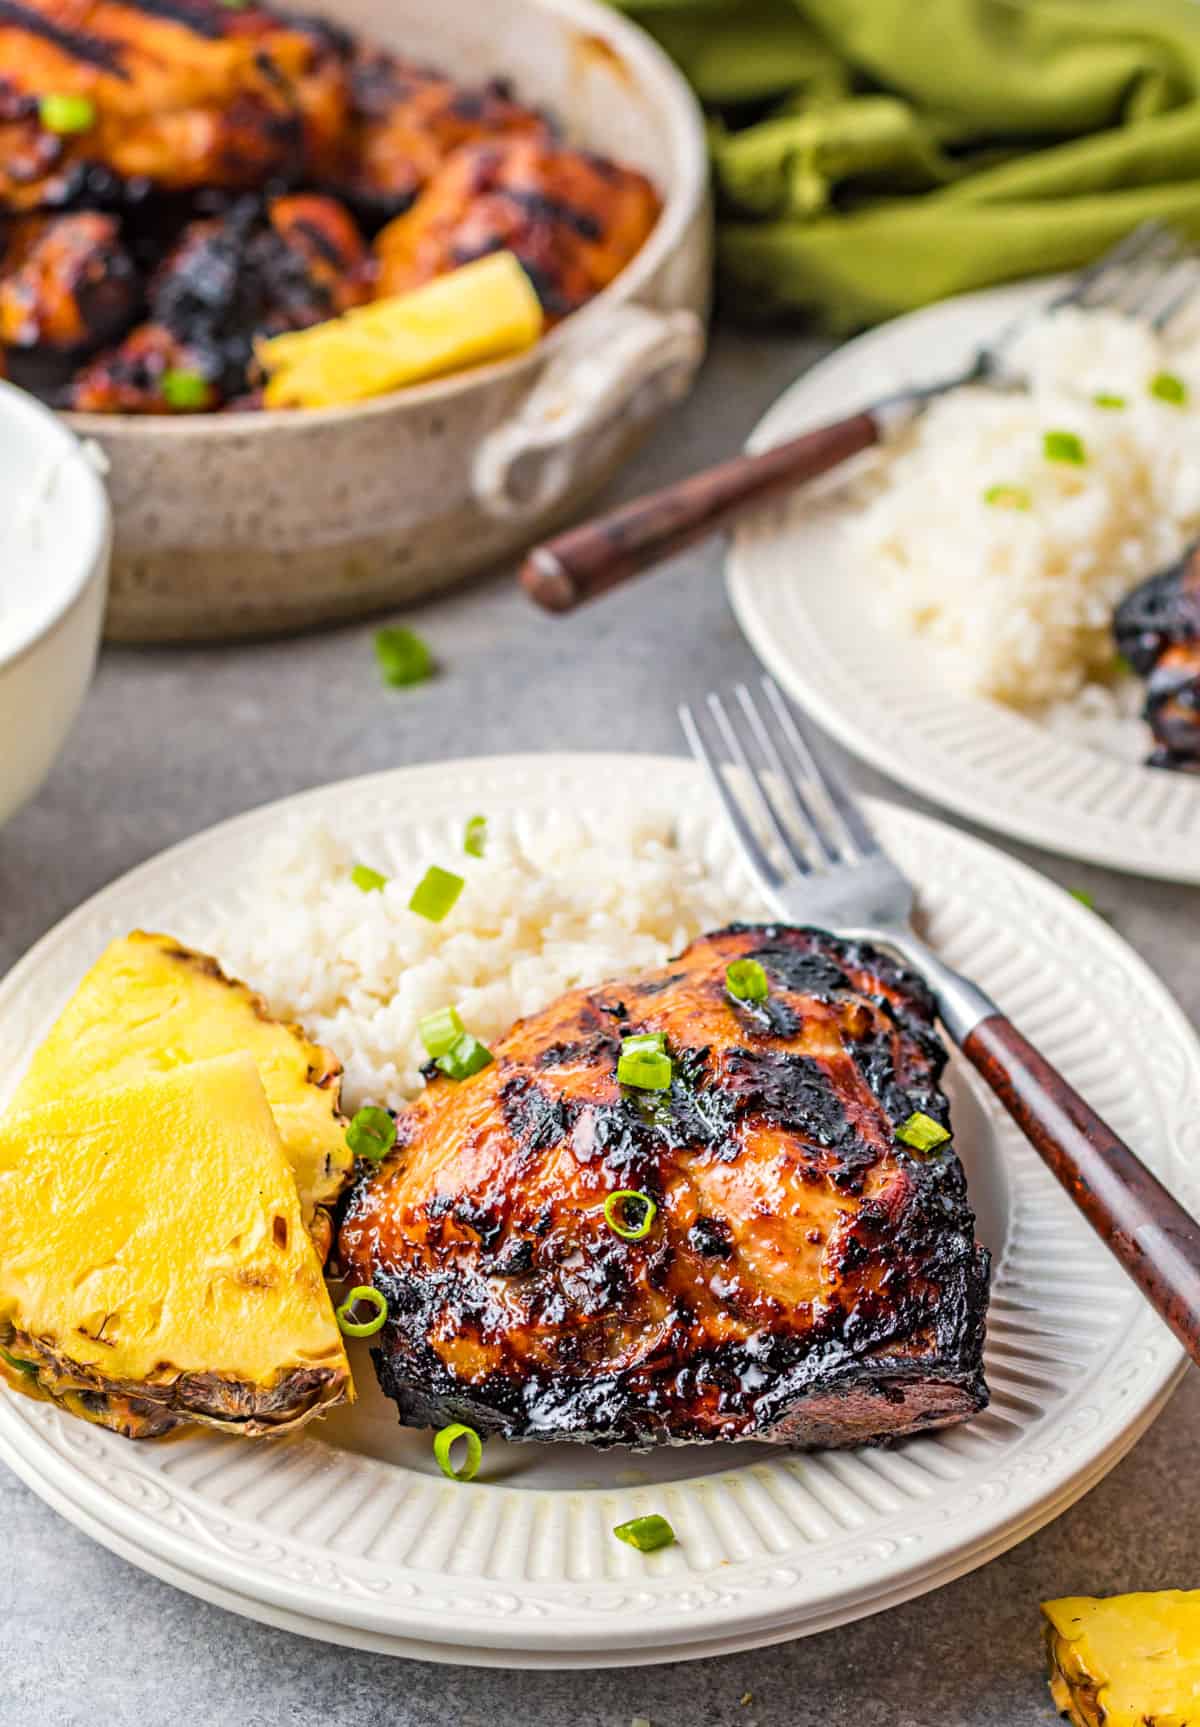 Huli huli grilled chicken on a plate with rice and pineapple.